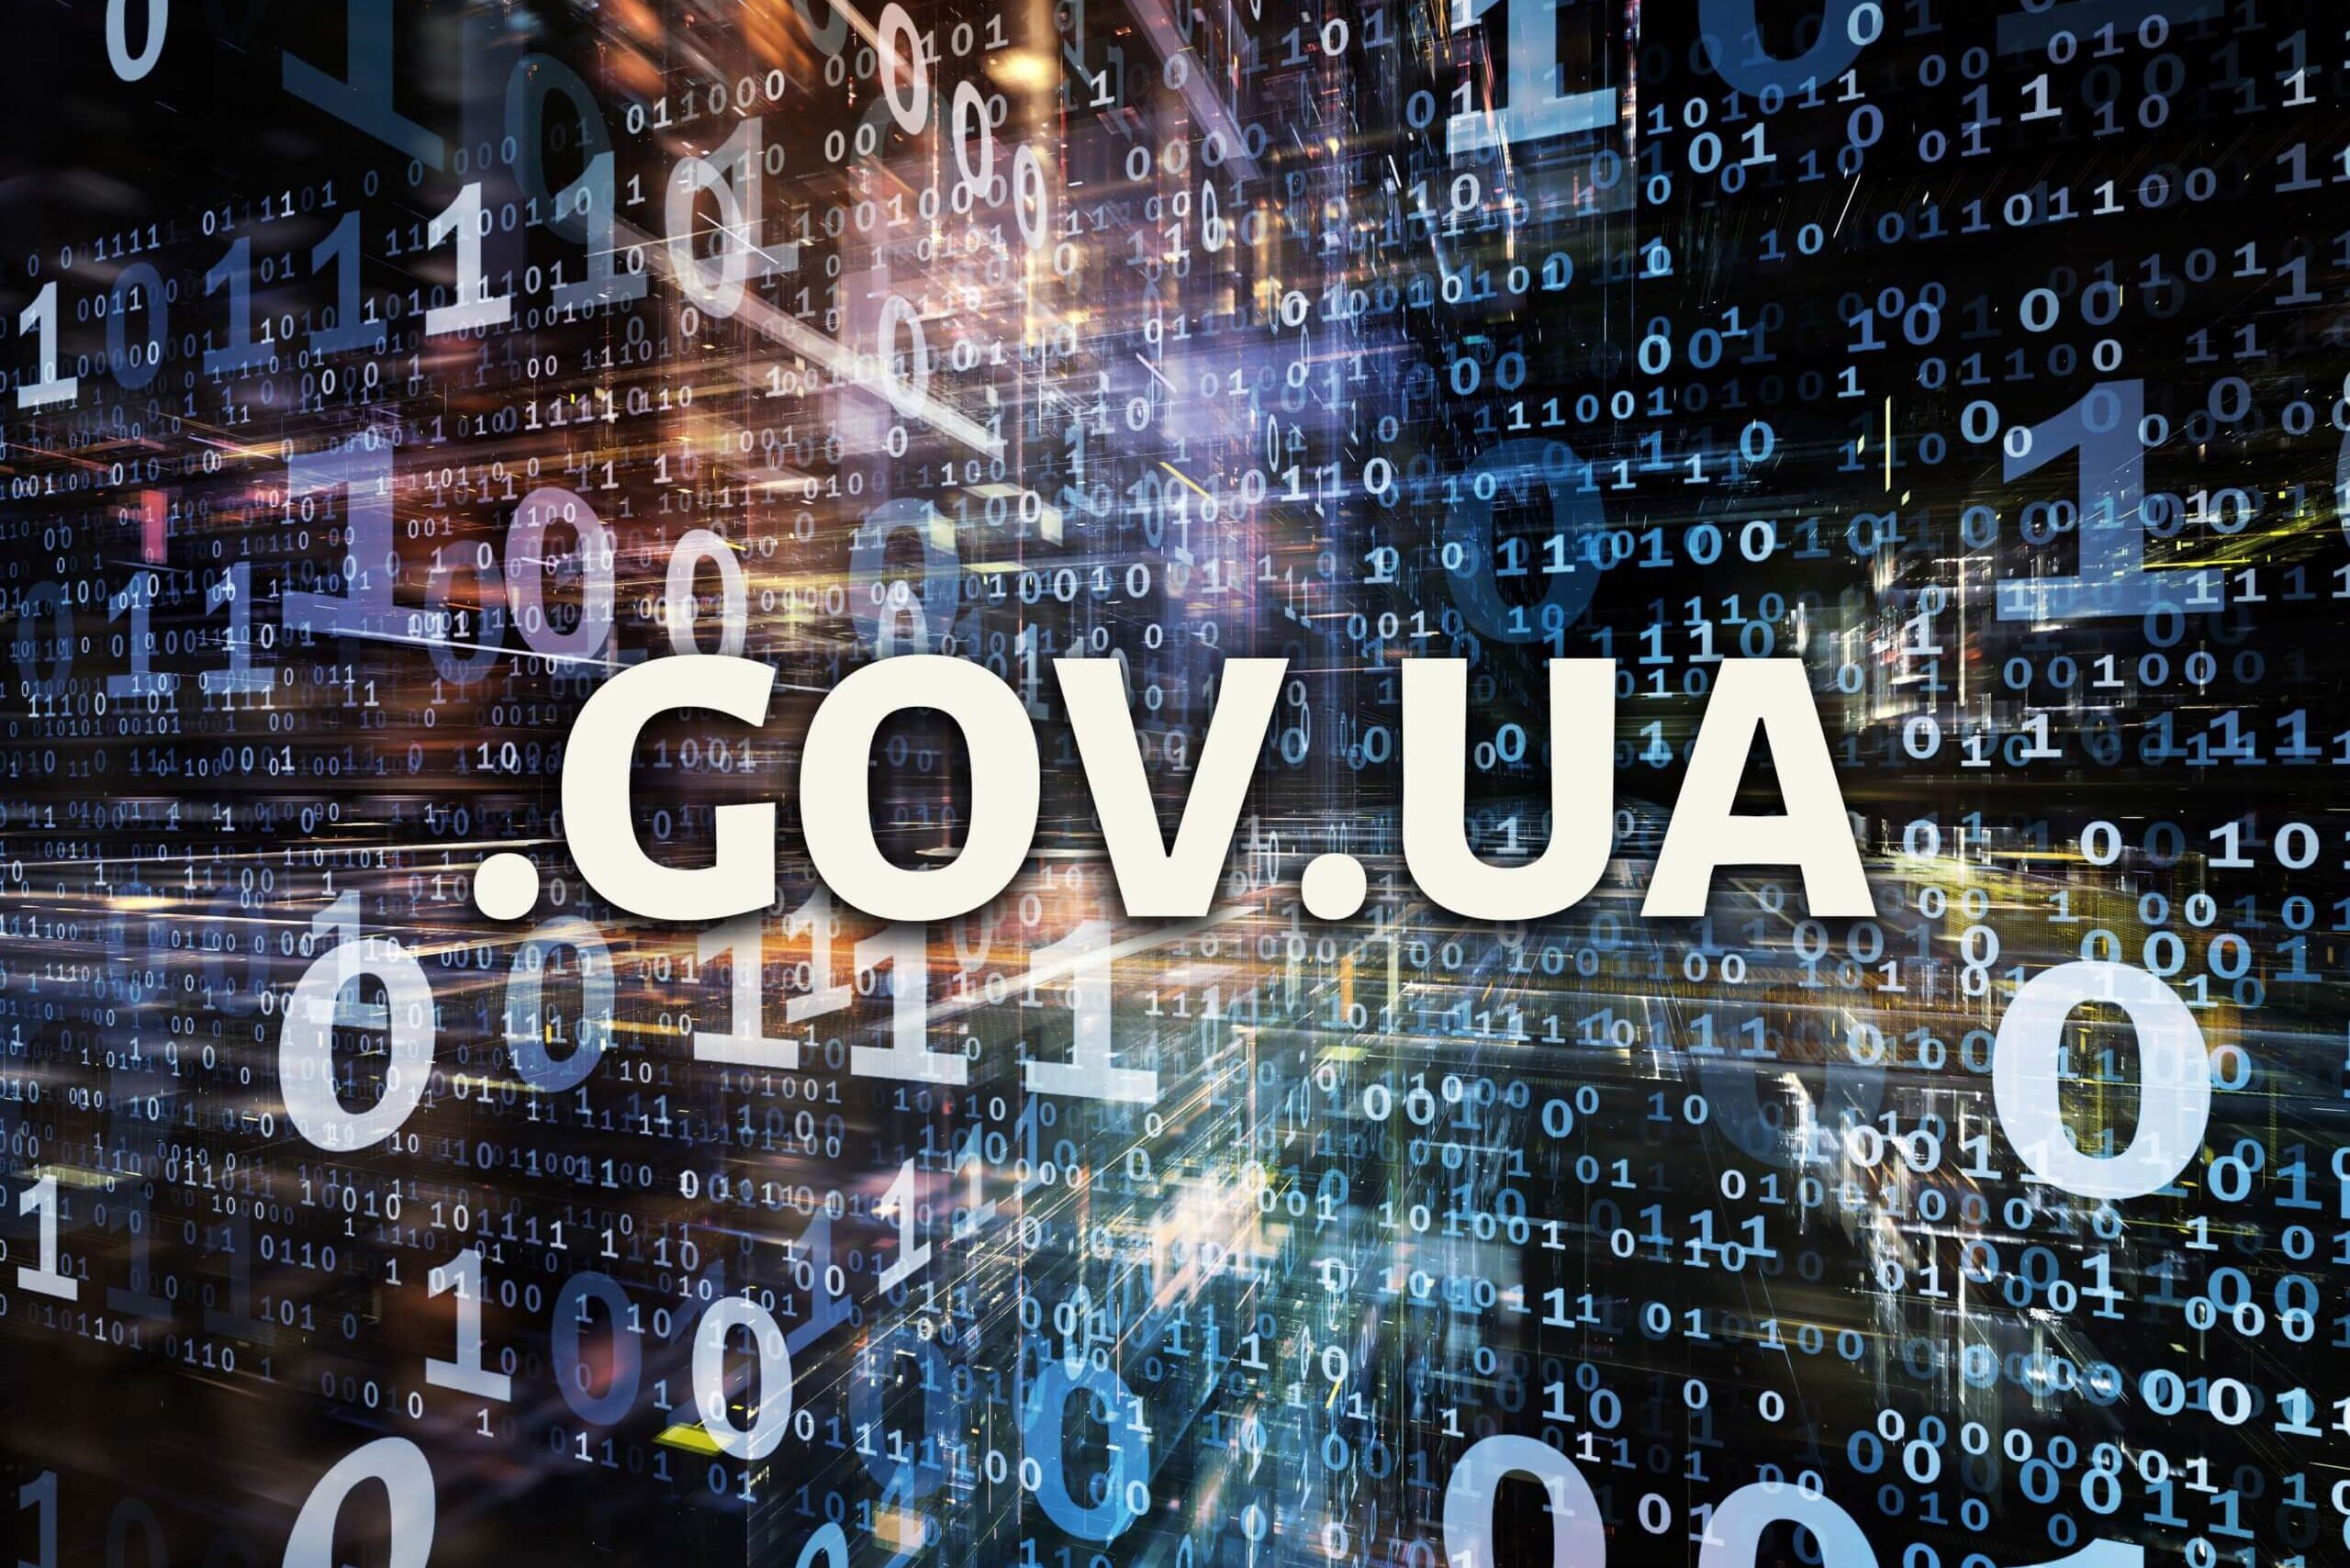 Eurasia Foundation, USAID, and the British Government Partner to Reduce Corruption through e-Governance Reform in Ukraine